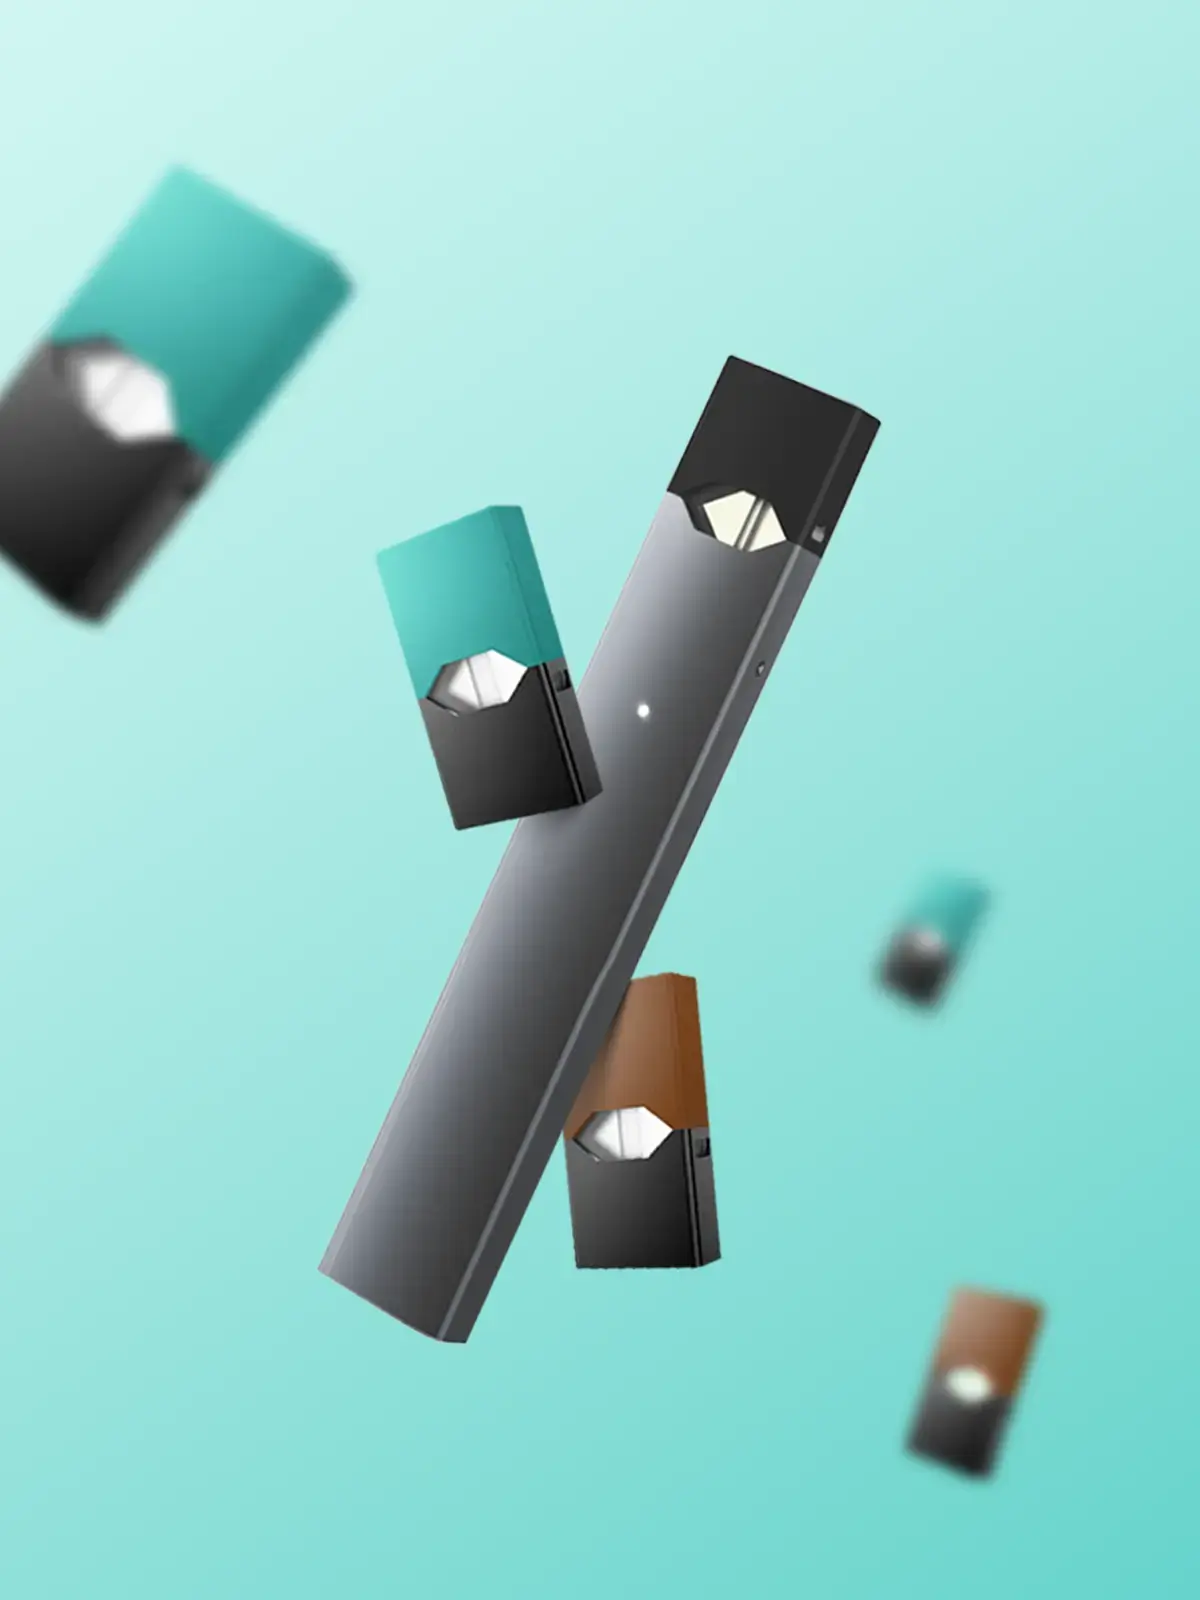 JUUL Menthol and JUUL Tobacco pods along with a JUUL device, floating in front of a light blue background